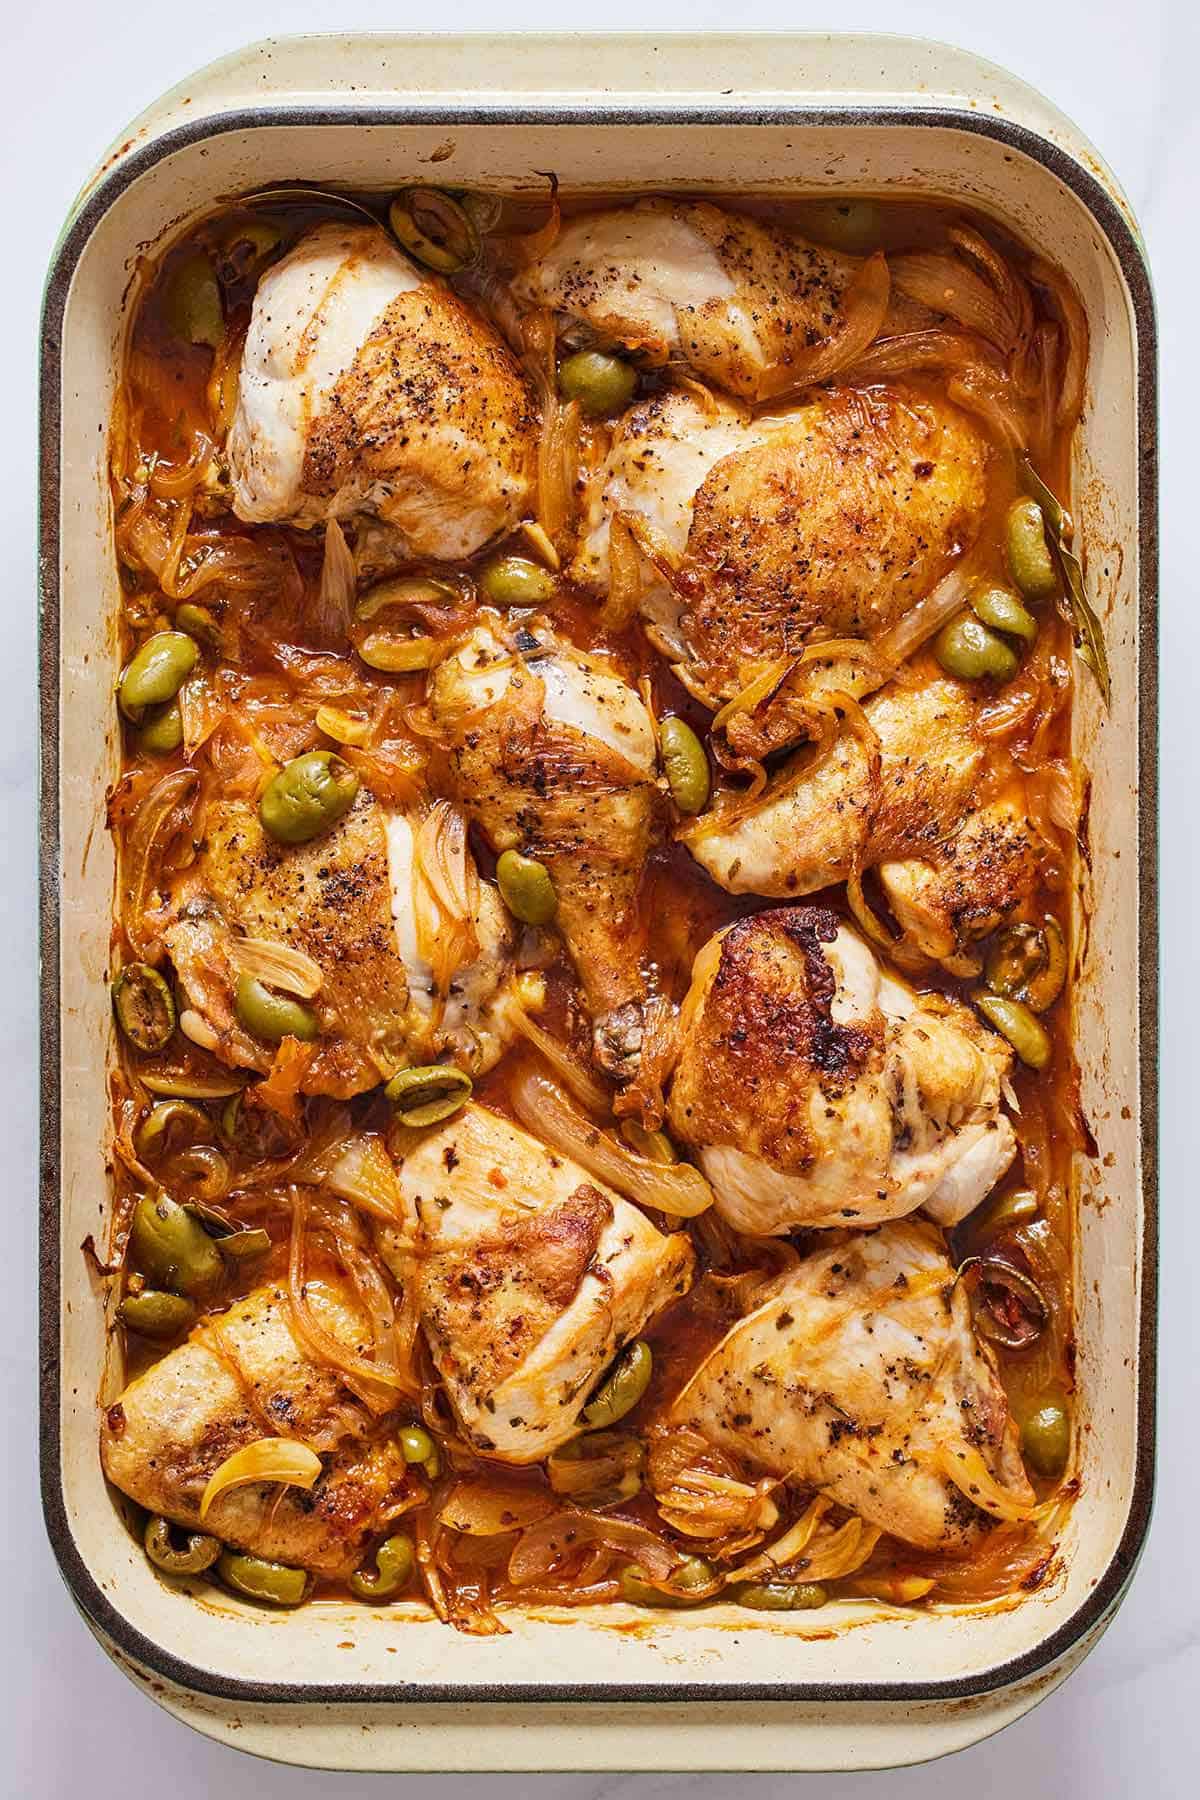 Overhead view of a baking dish with saucy braised chicken thighs with their skins on.